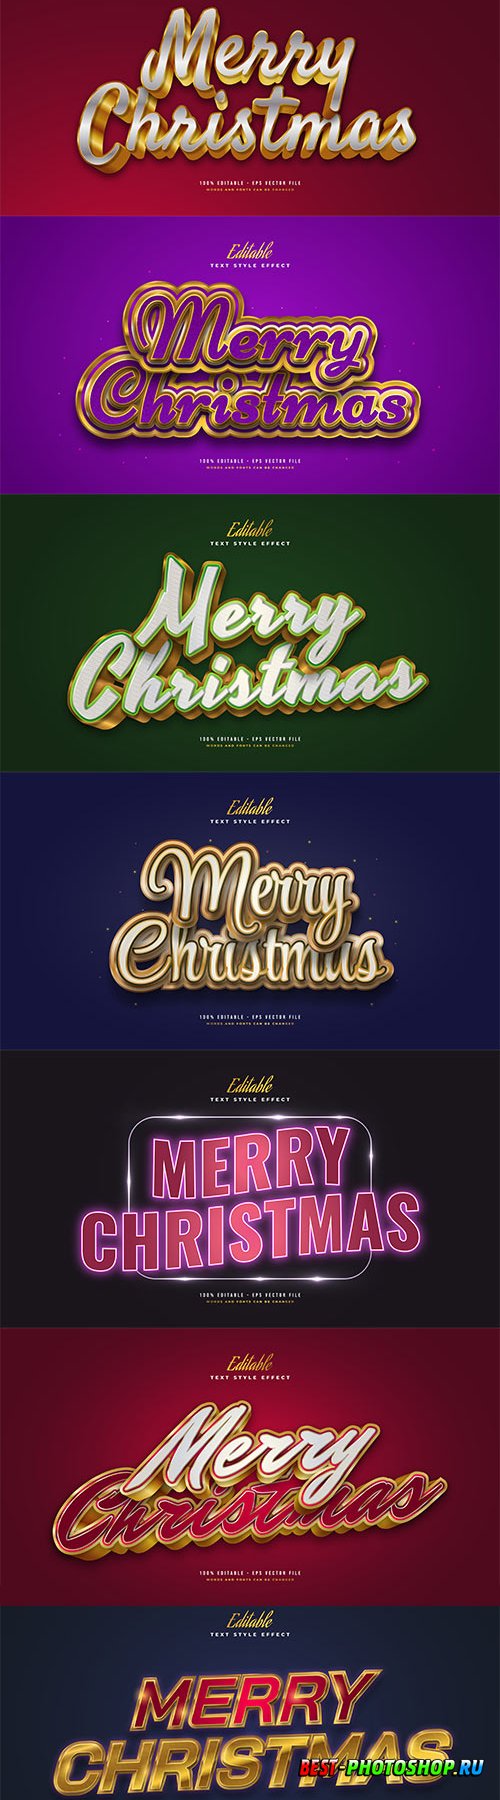 Merry christmas and happy new year 2022 editable vector text effects vol 20